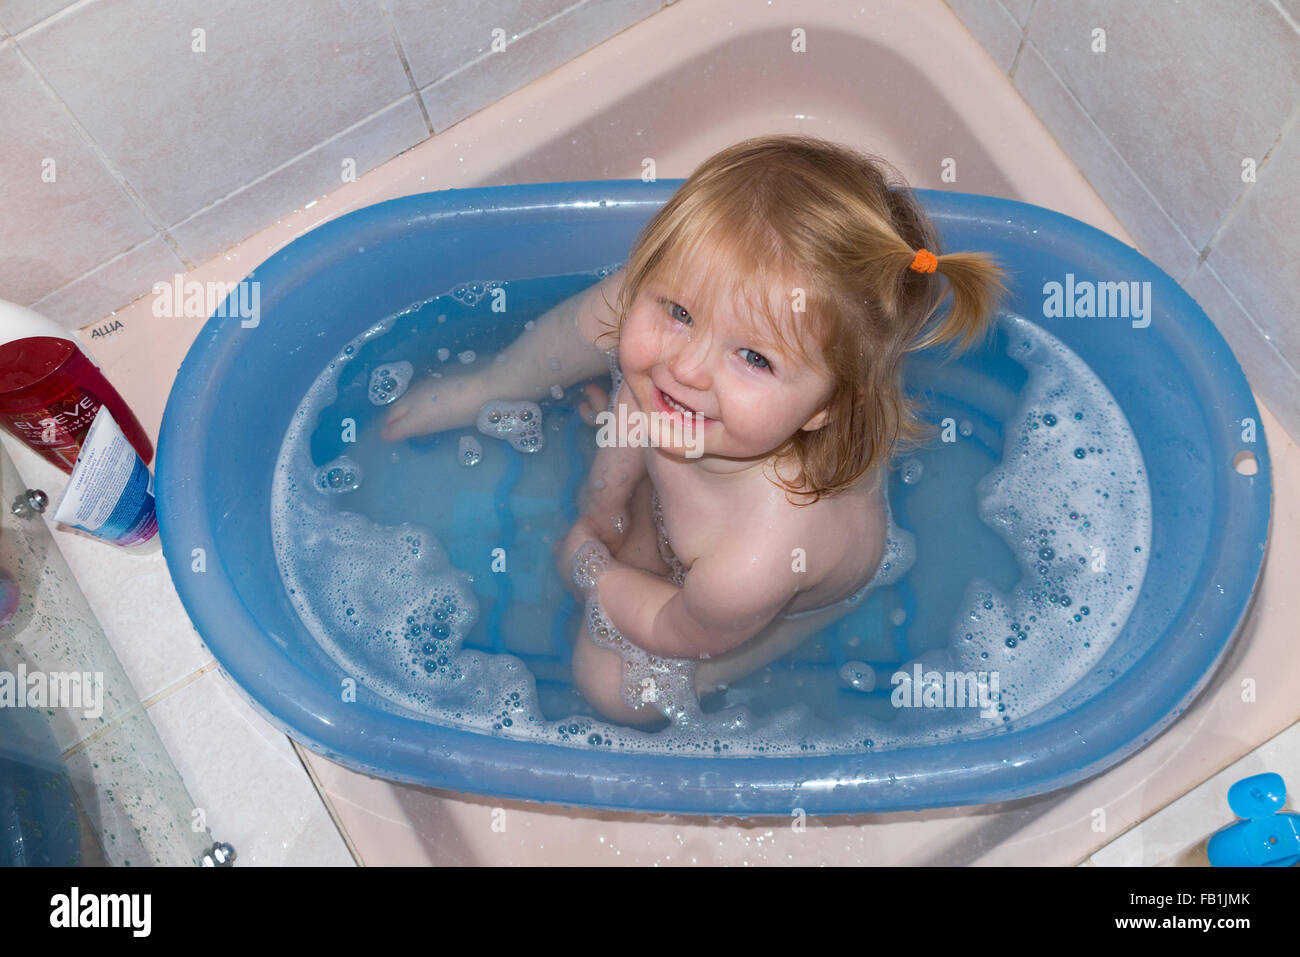 bath for 1 year old